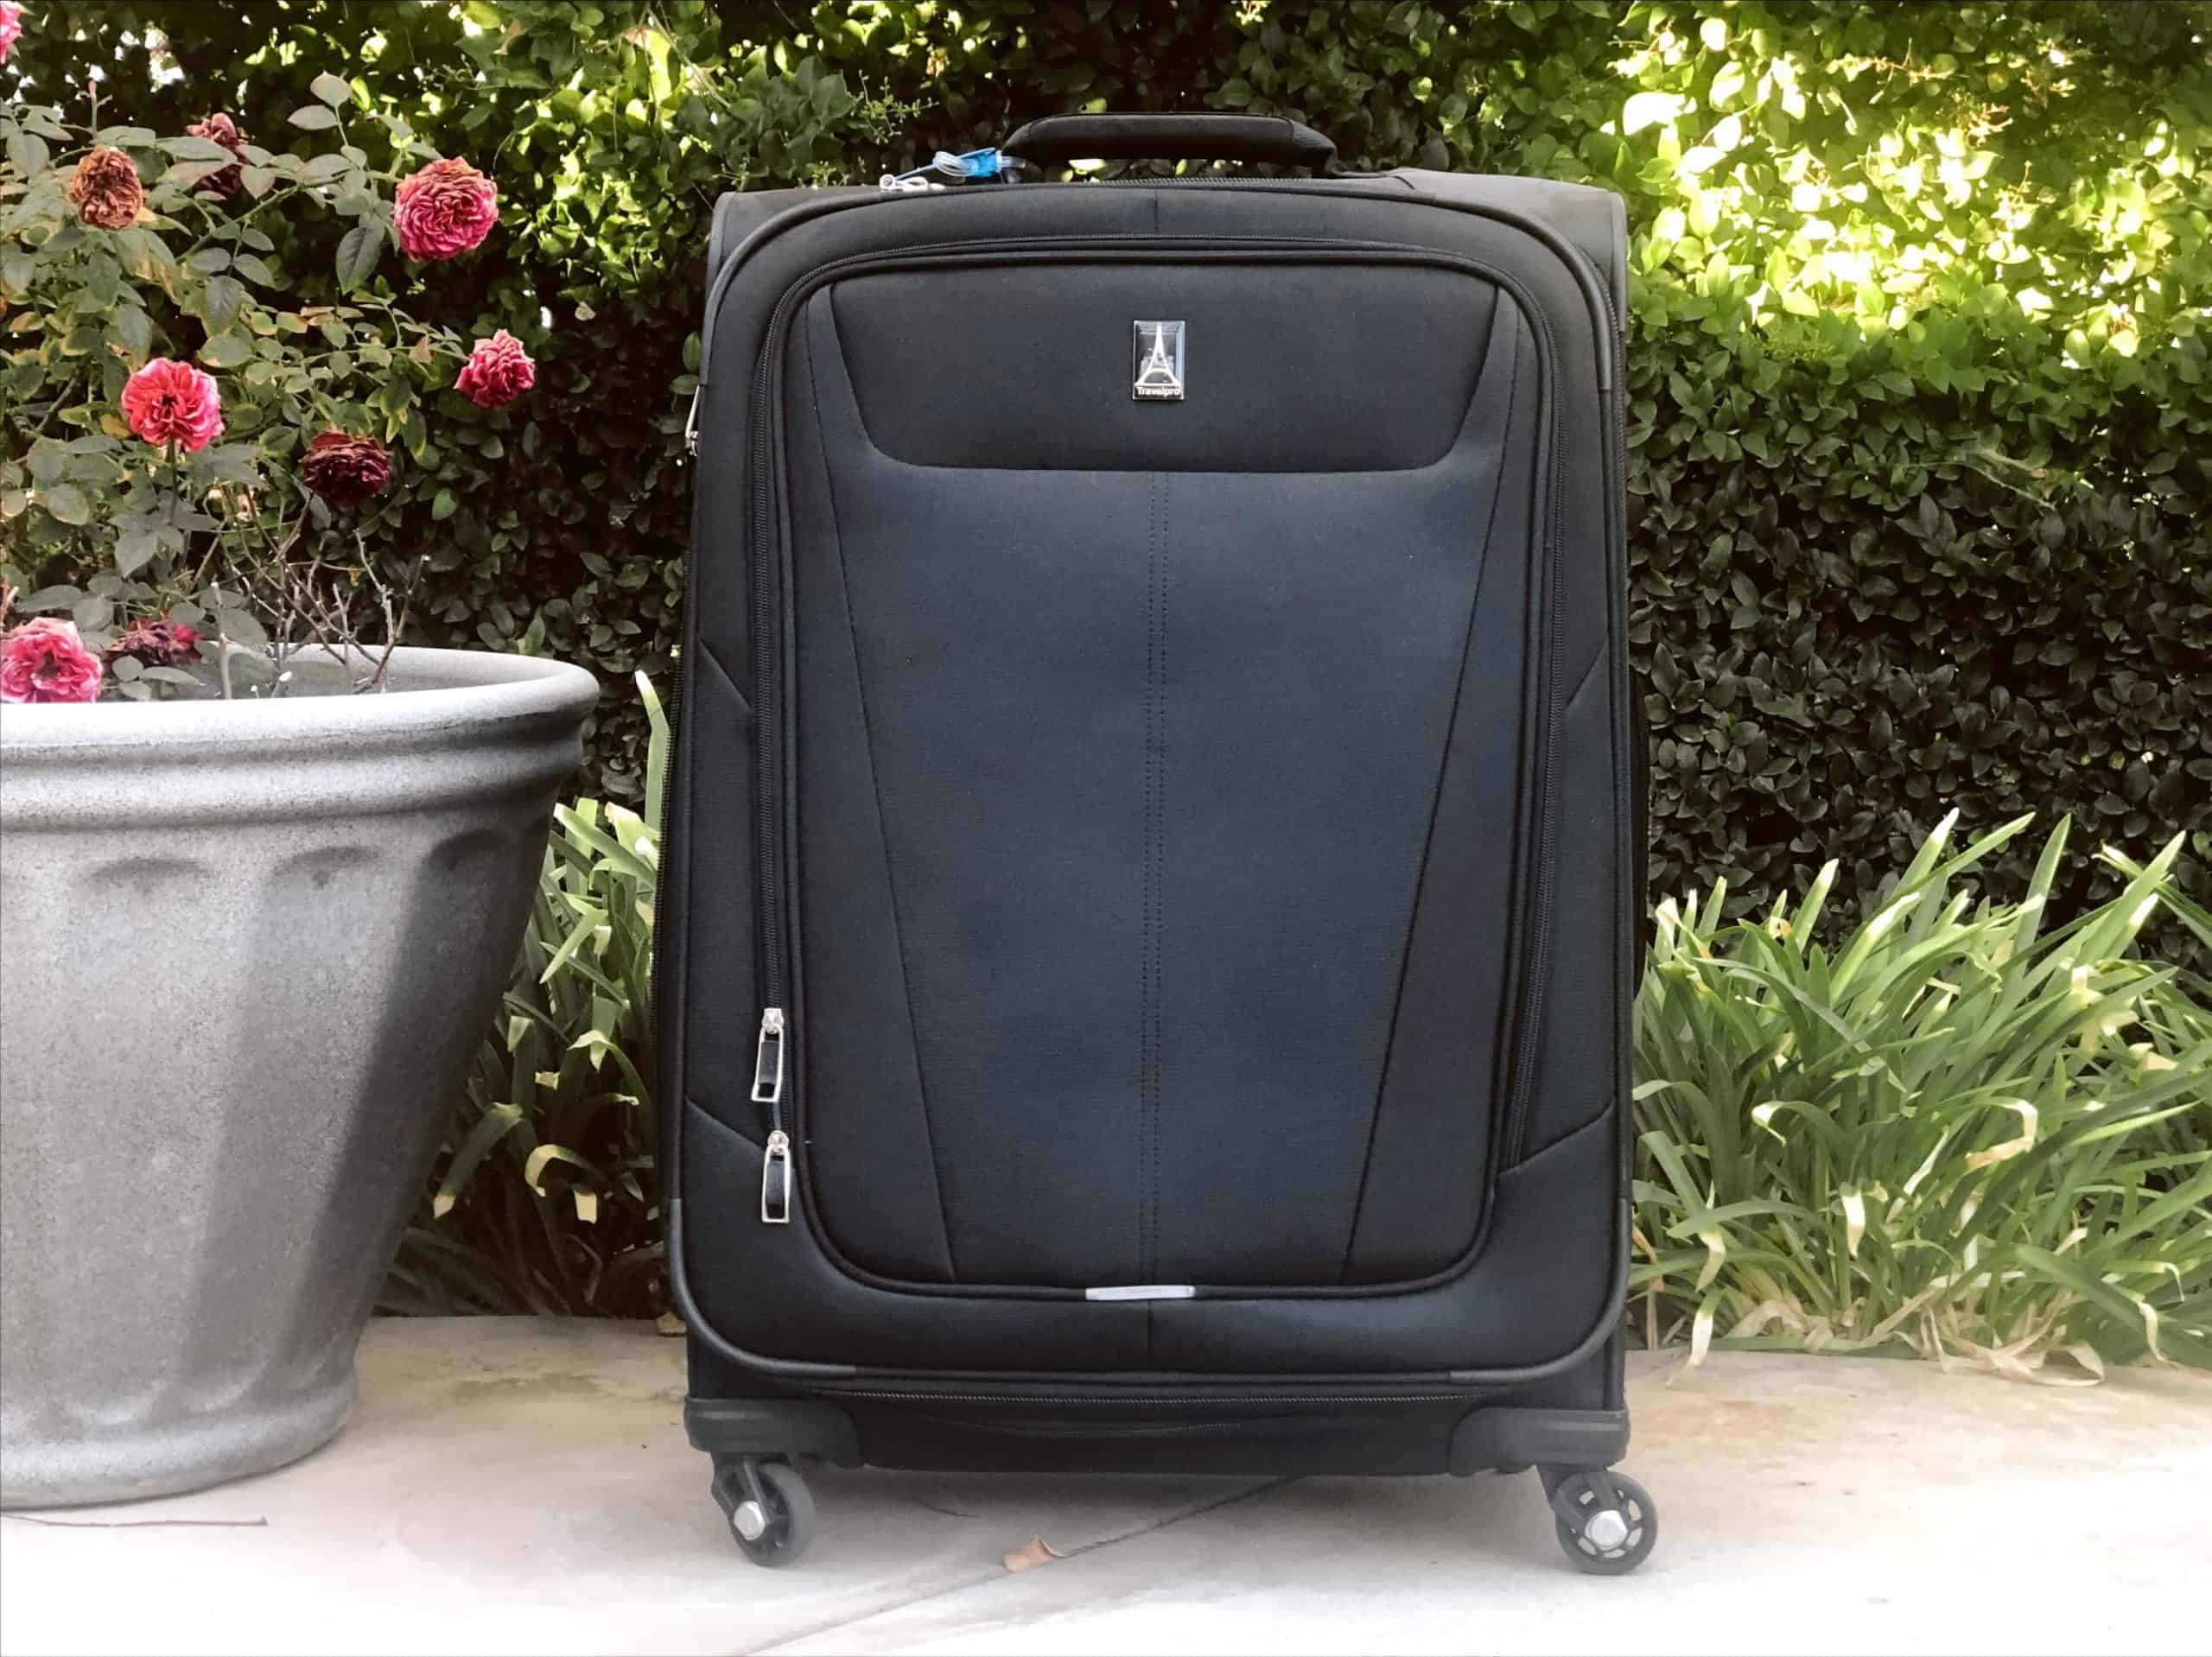 Travelpro Maxlite 5 Rolling Tote, Black, One Size